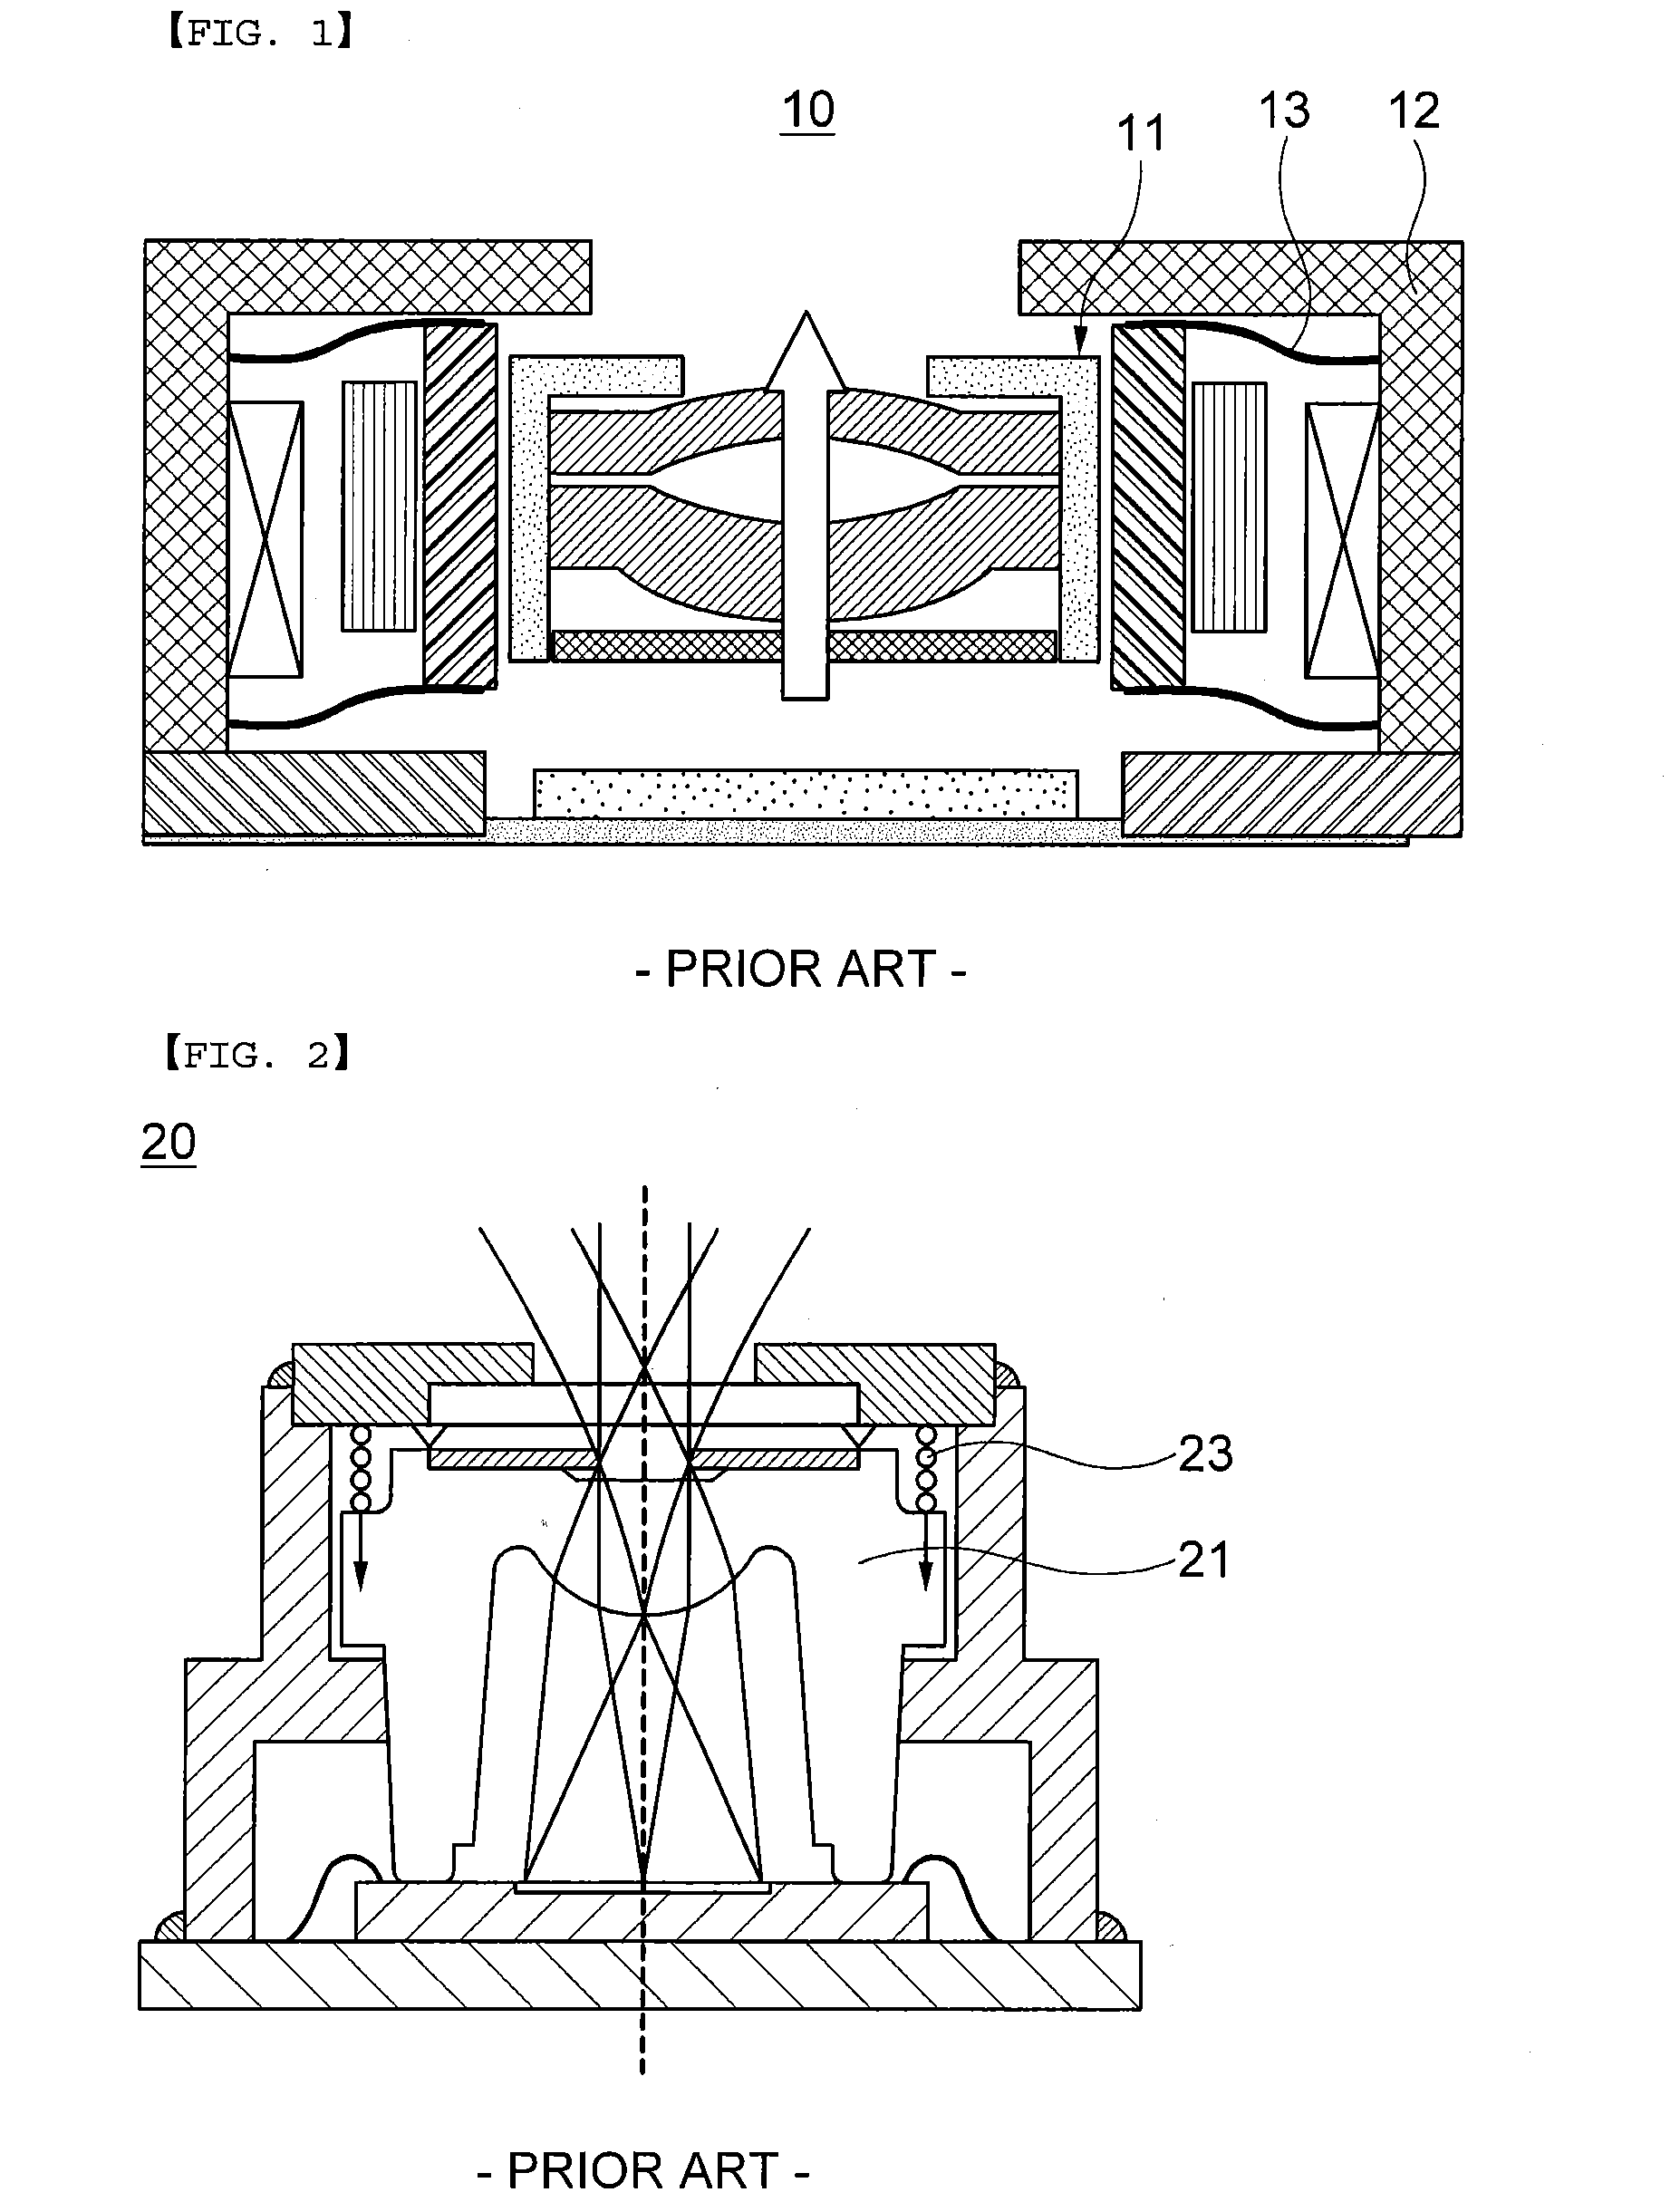 Image photographing device